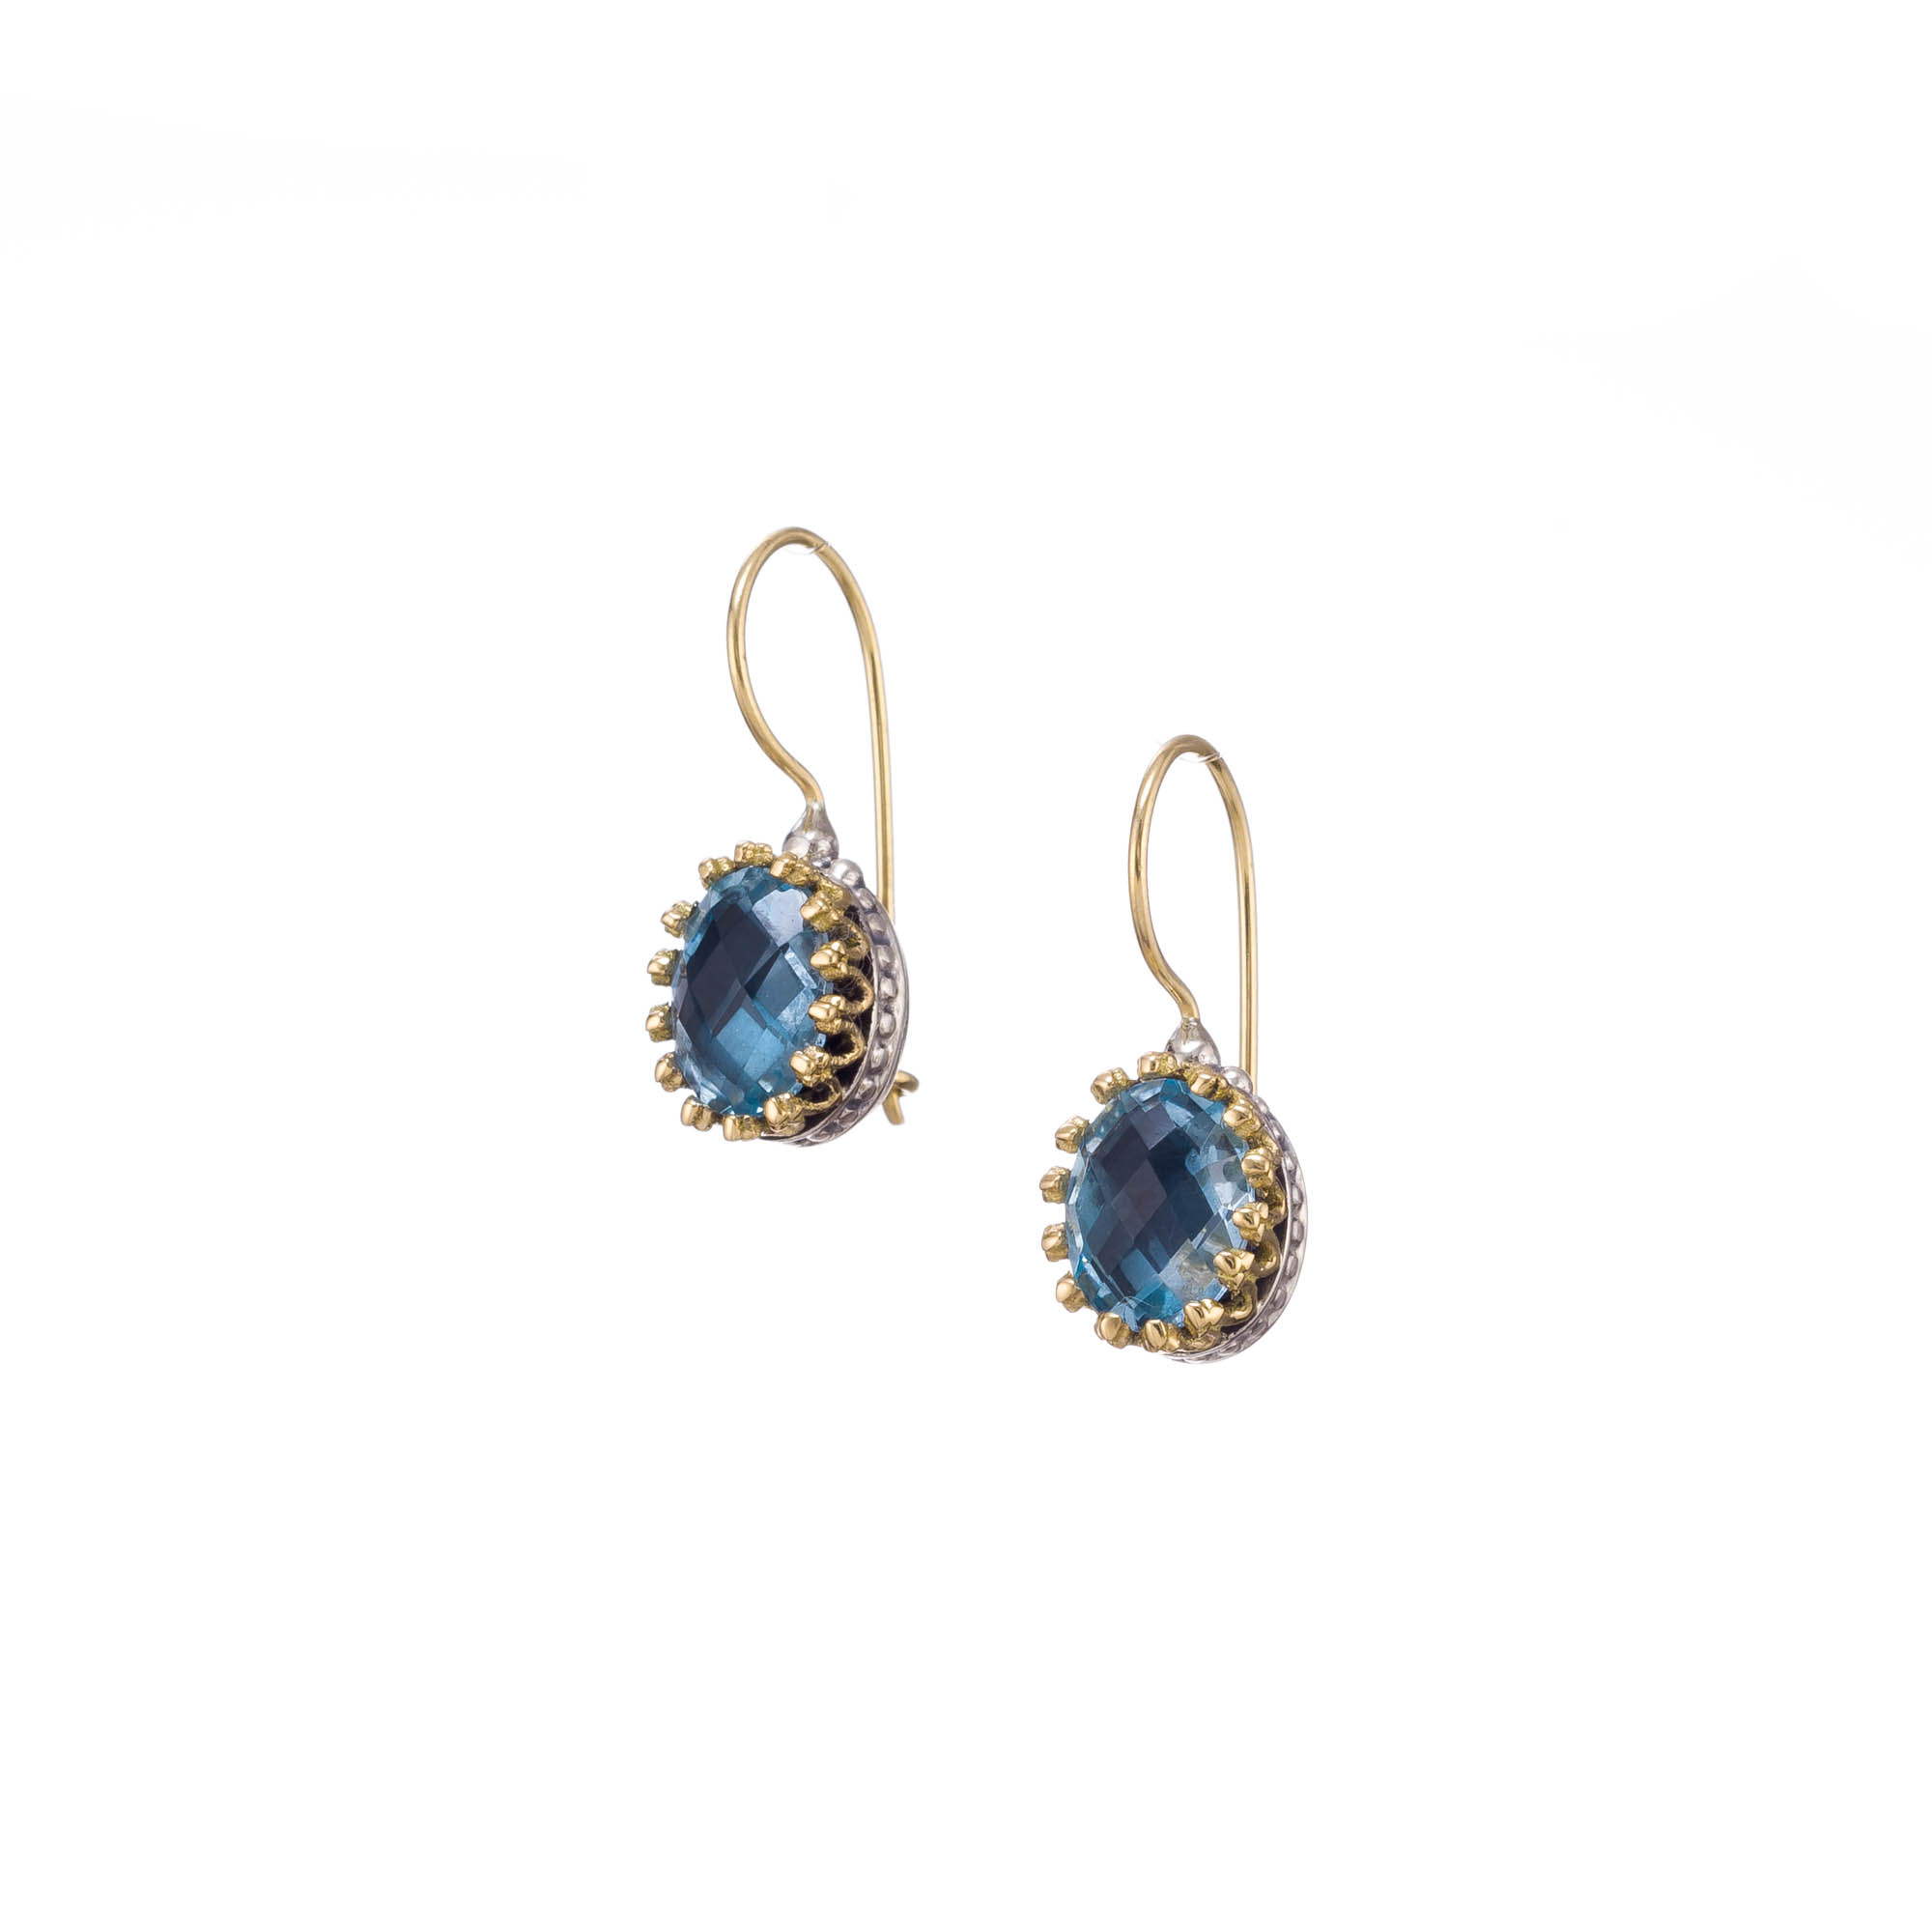 Crown small oval earrings in 18K Gold and Sterling Silver with blue topaz